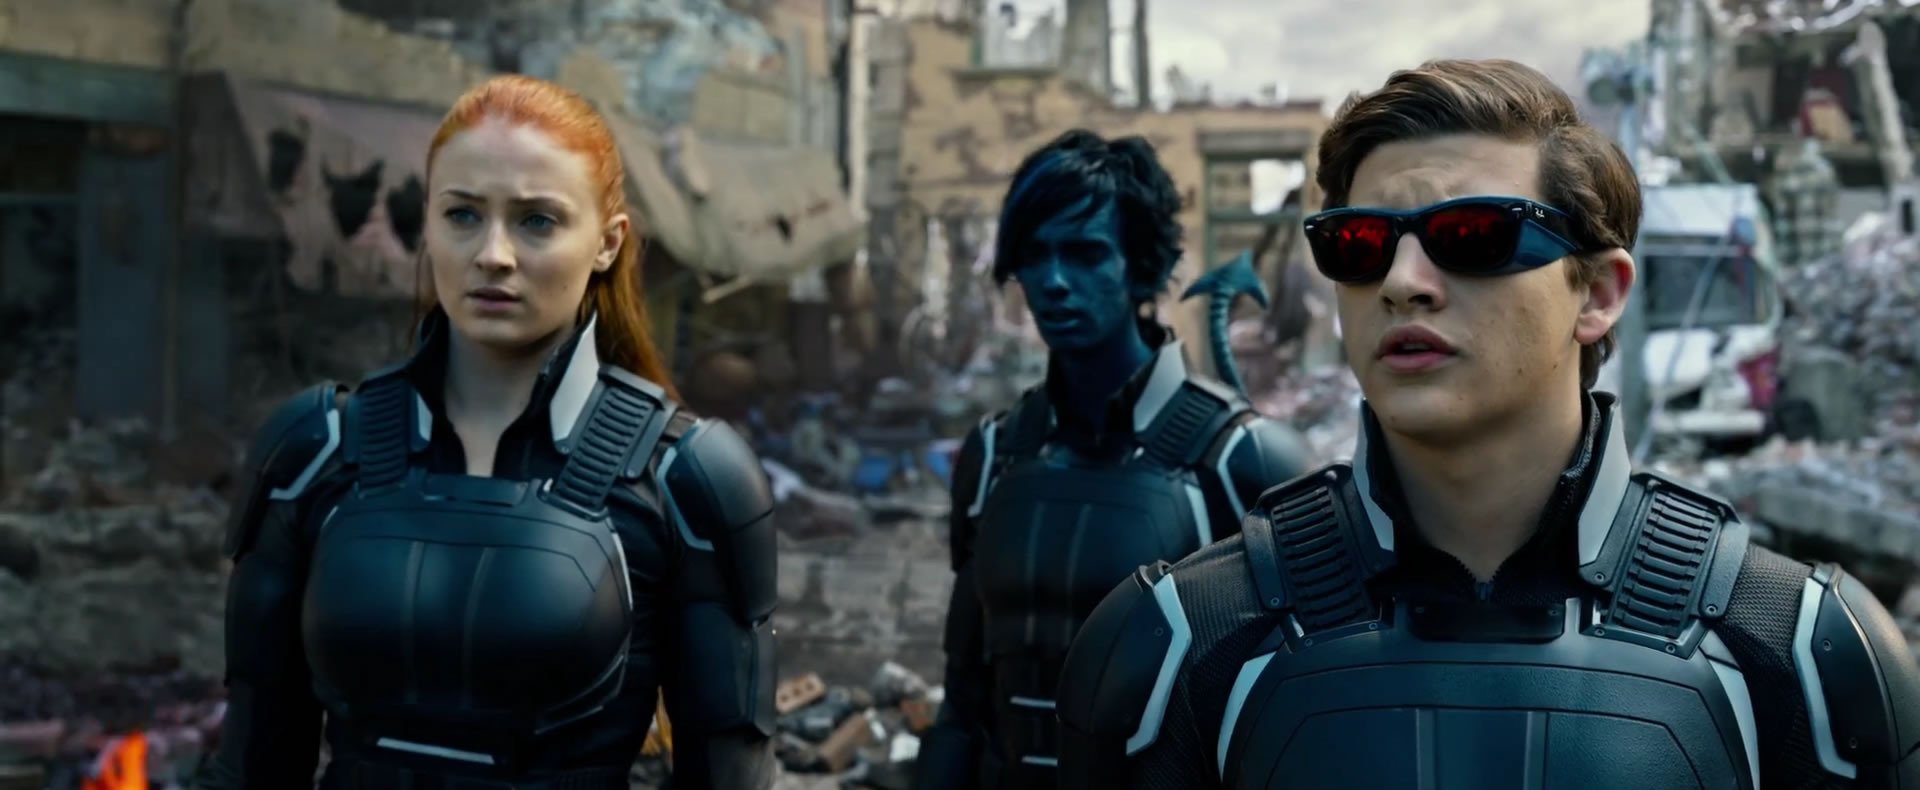 There could be multiple X-Men teams dead, just like the Avengers